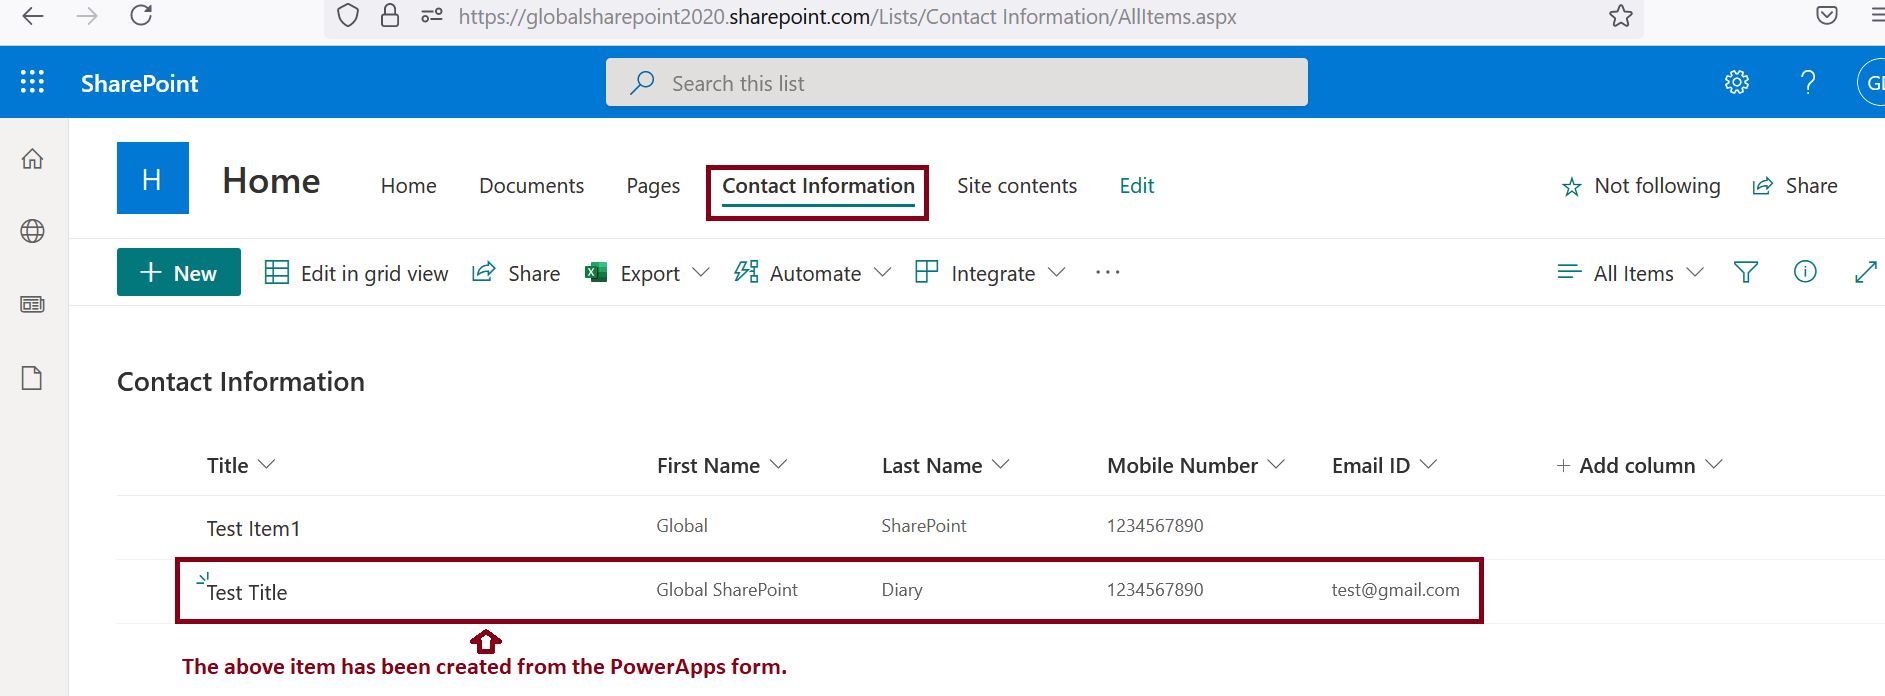 SharePoint list item has been created using the PowerApps SubmitForm function